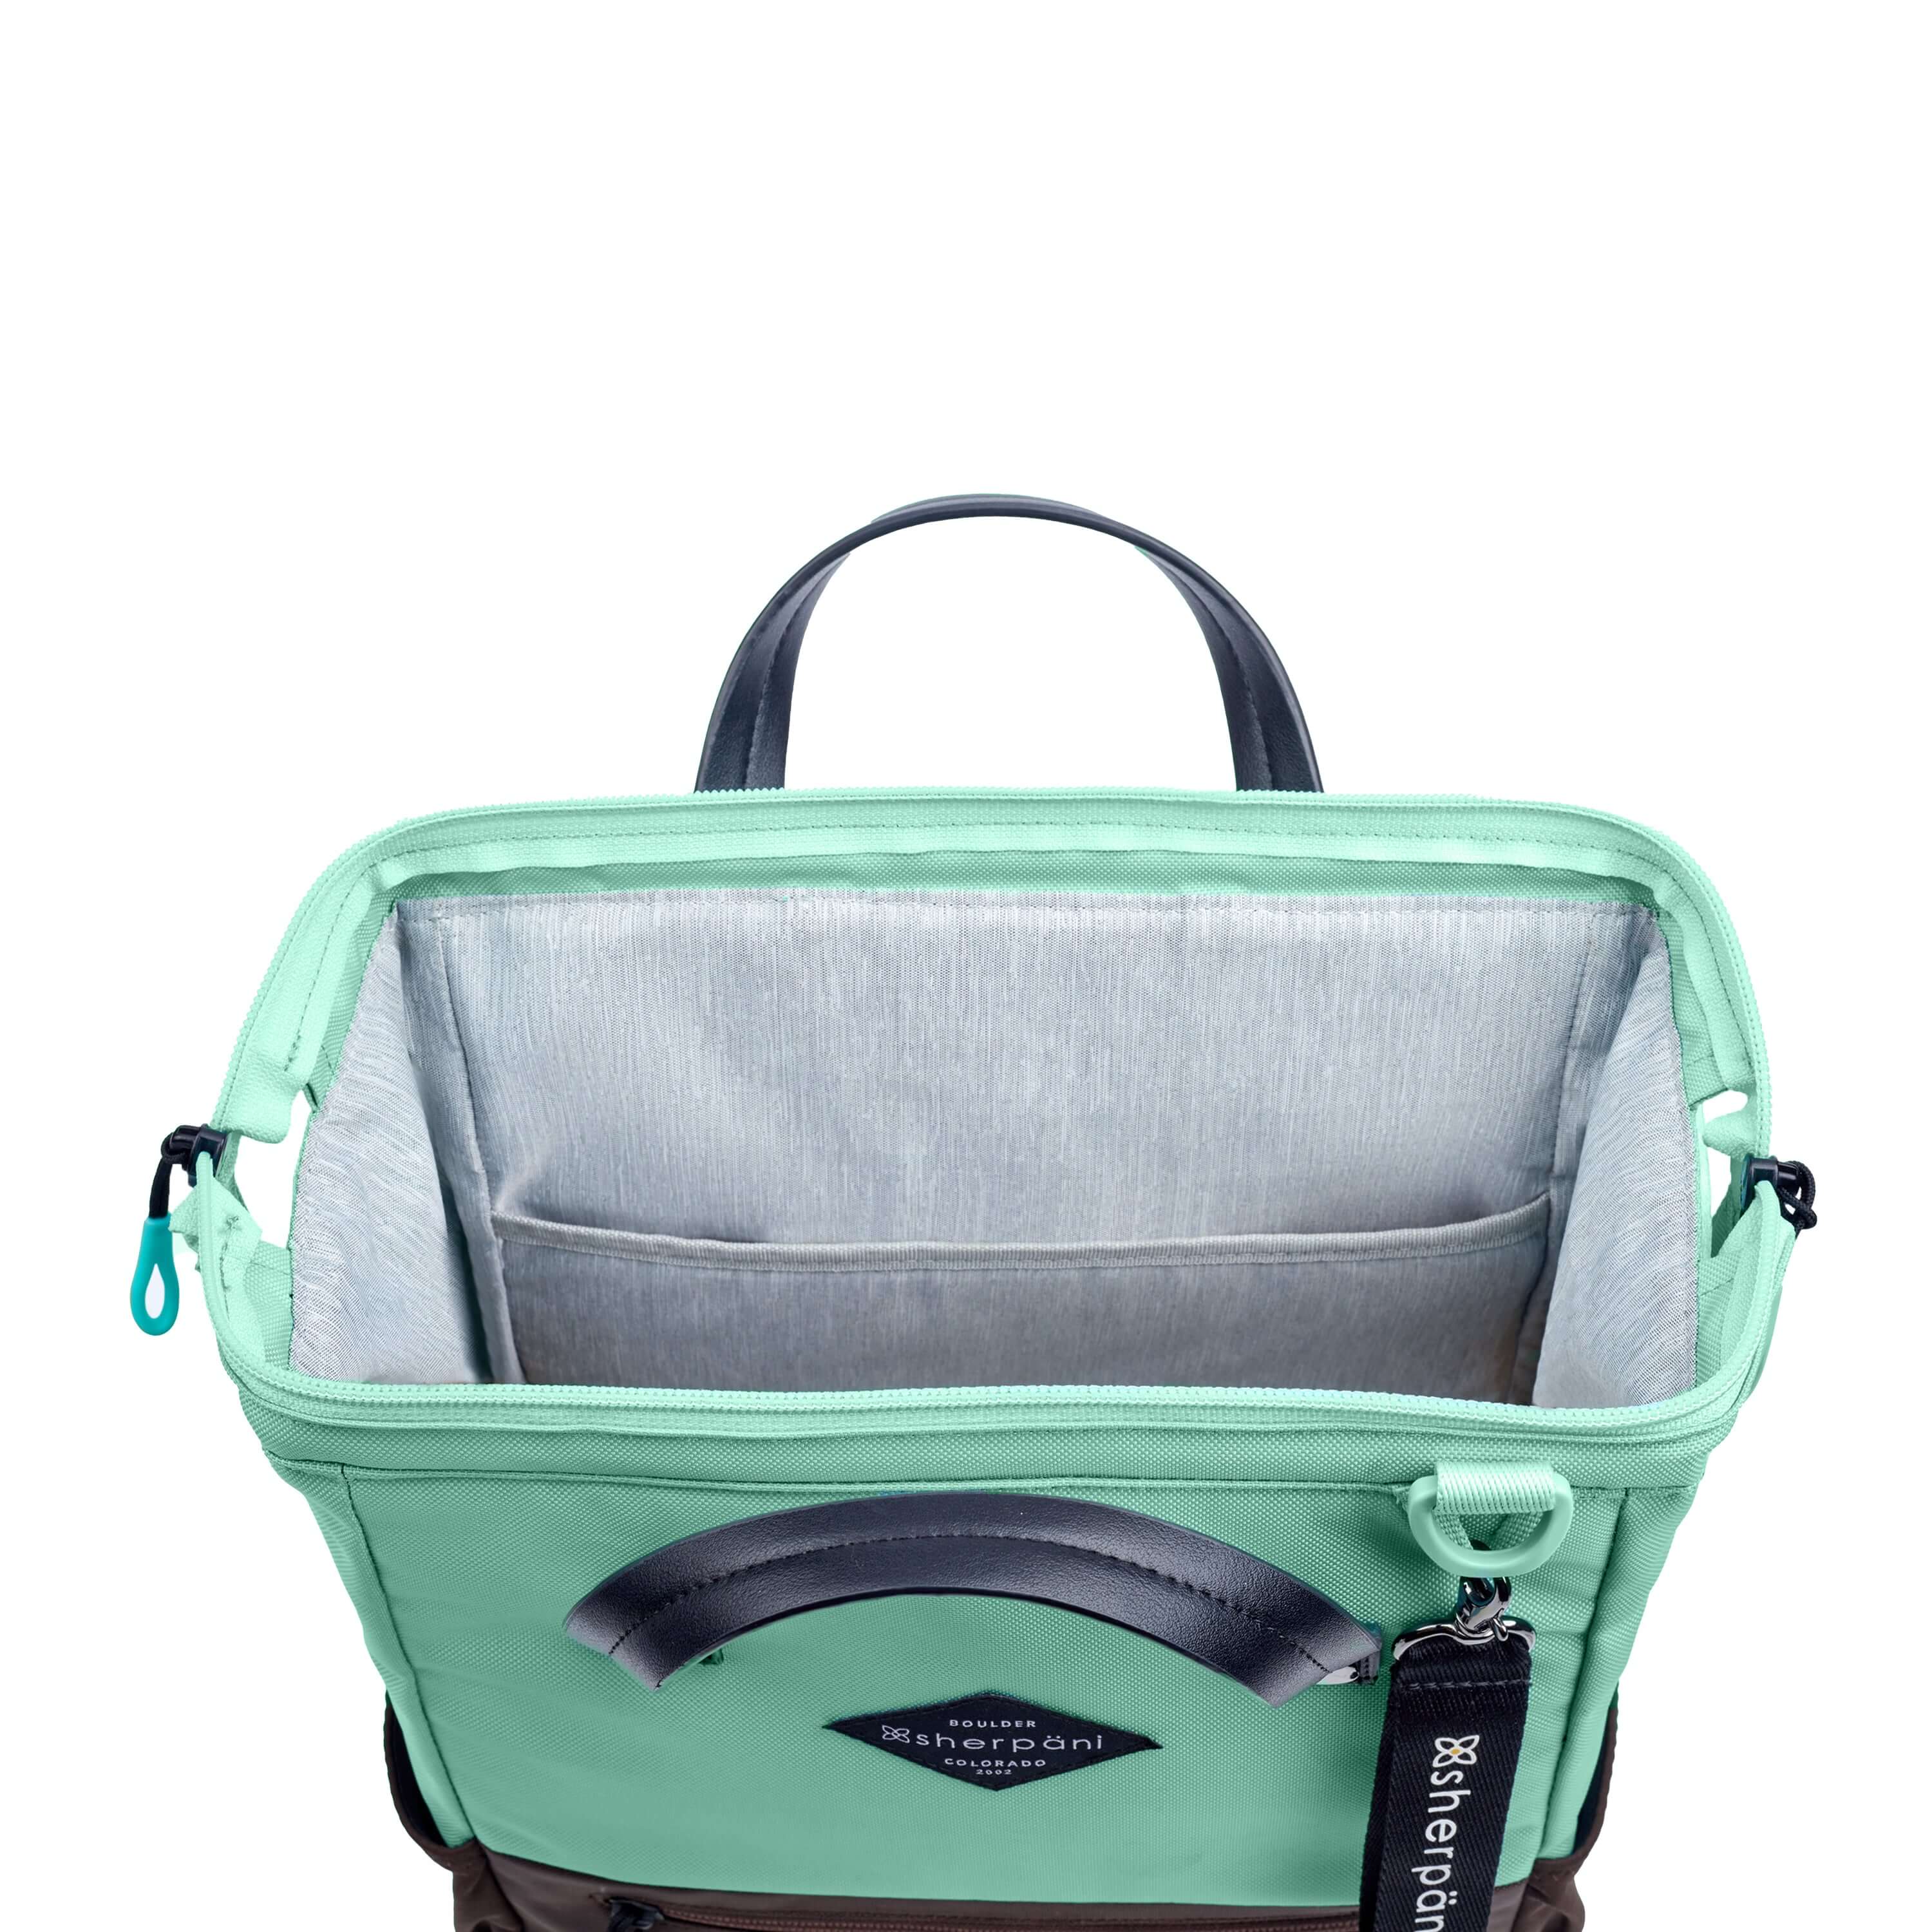 Top view of Sherpani three-in-one bag, the Dispatch in Seagreen. The main zipper compartment is open to reveal a doctor bag style opening with a rectangular metal frame. The inside of the bag is light gray and features an internal pouch.